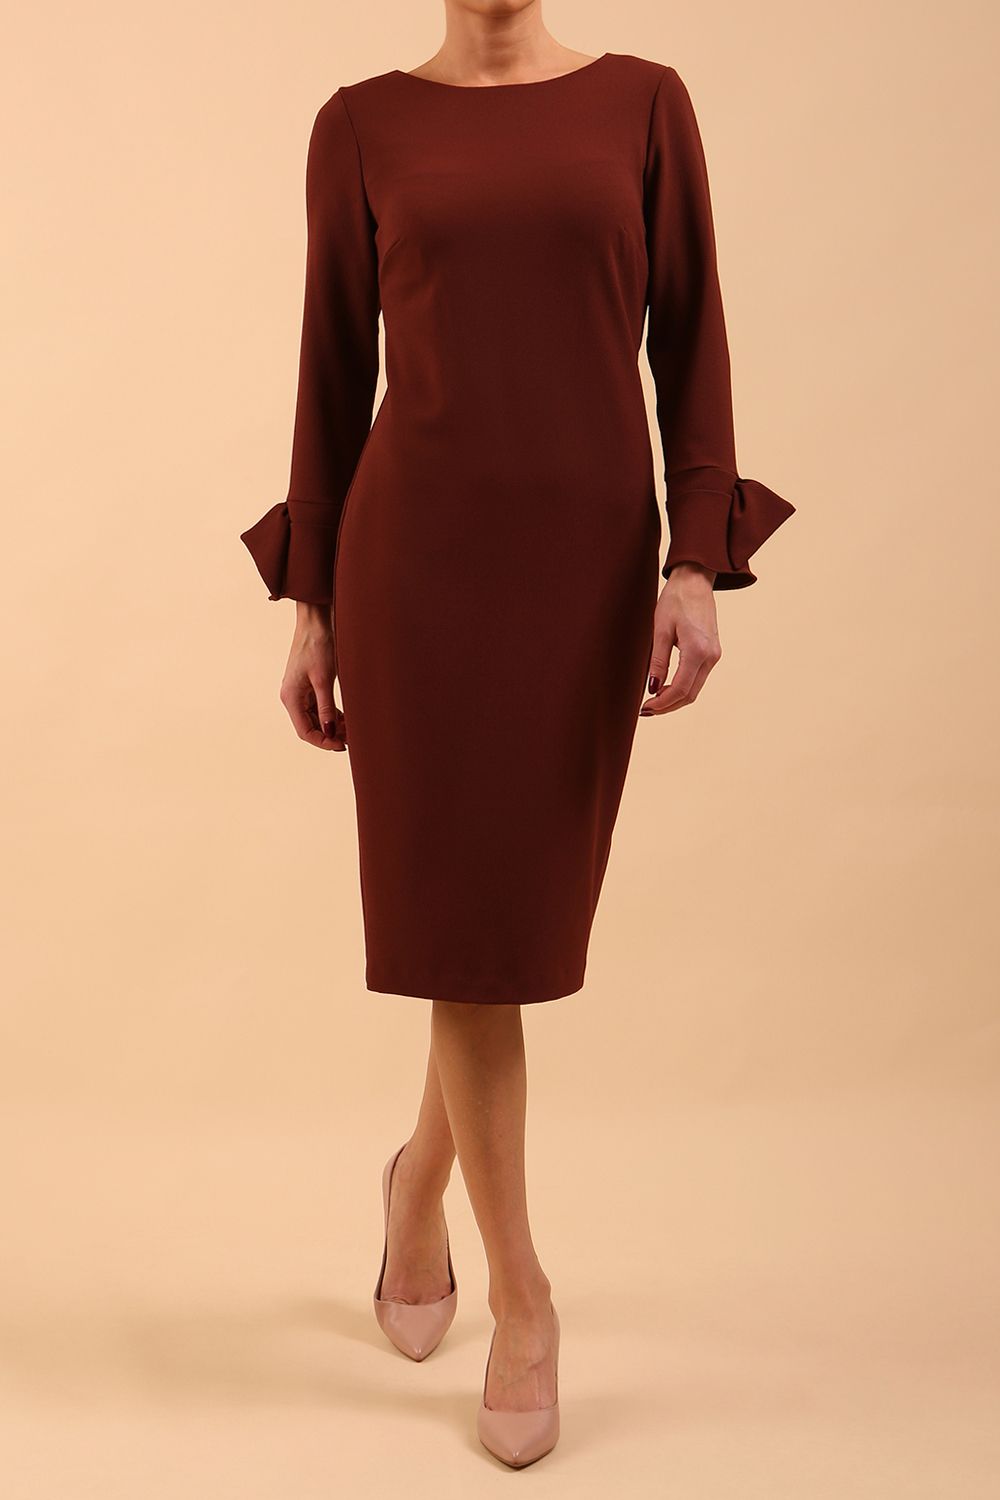 brunette model wearing diva catwalk fitted dress with sleeves called Alma Pencil-skirt dress in colour mahogany brown with bow detail on sleeves front